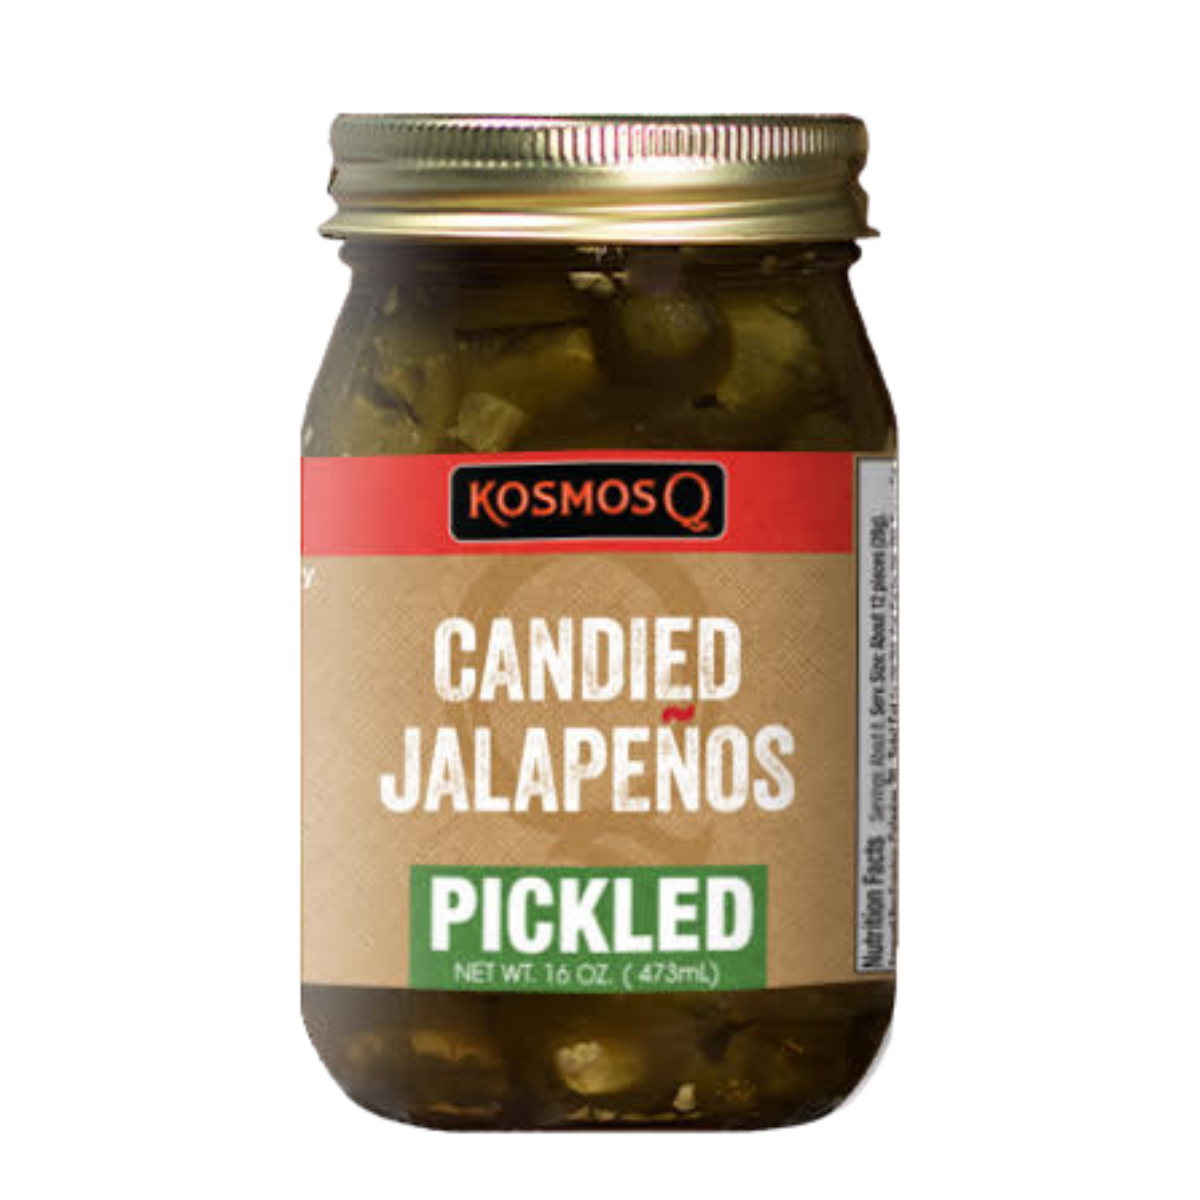 Kosmos Q BBQ Products & Supplies Candied Jalapenos